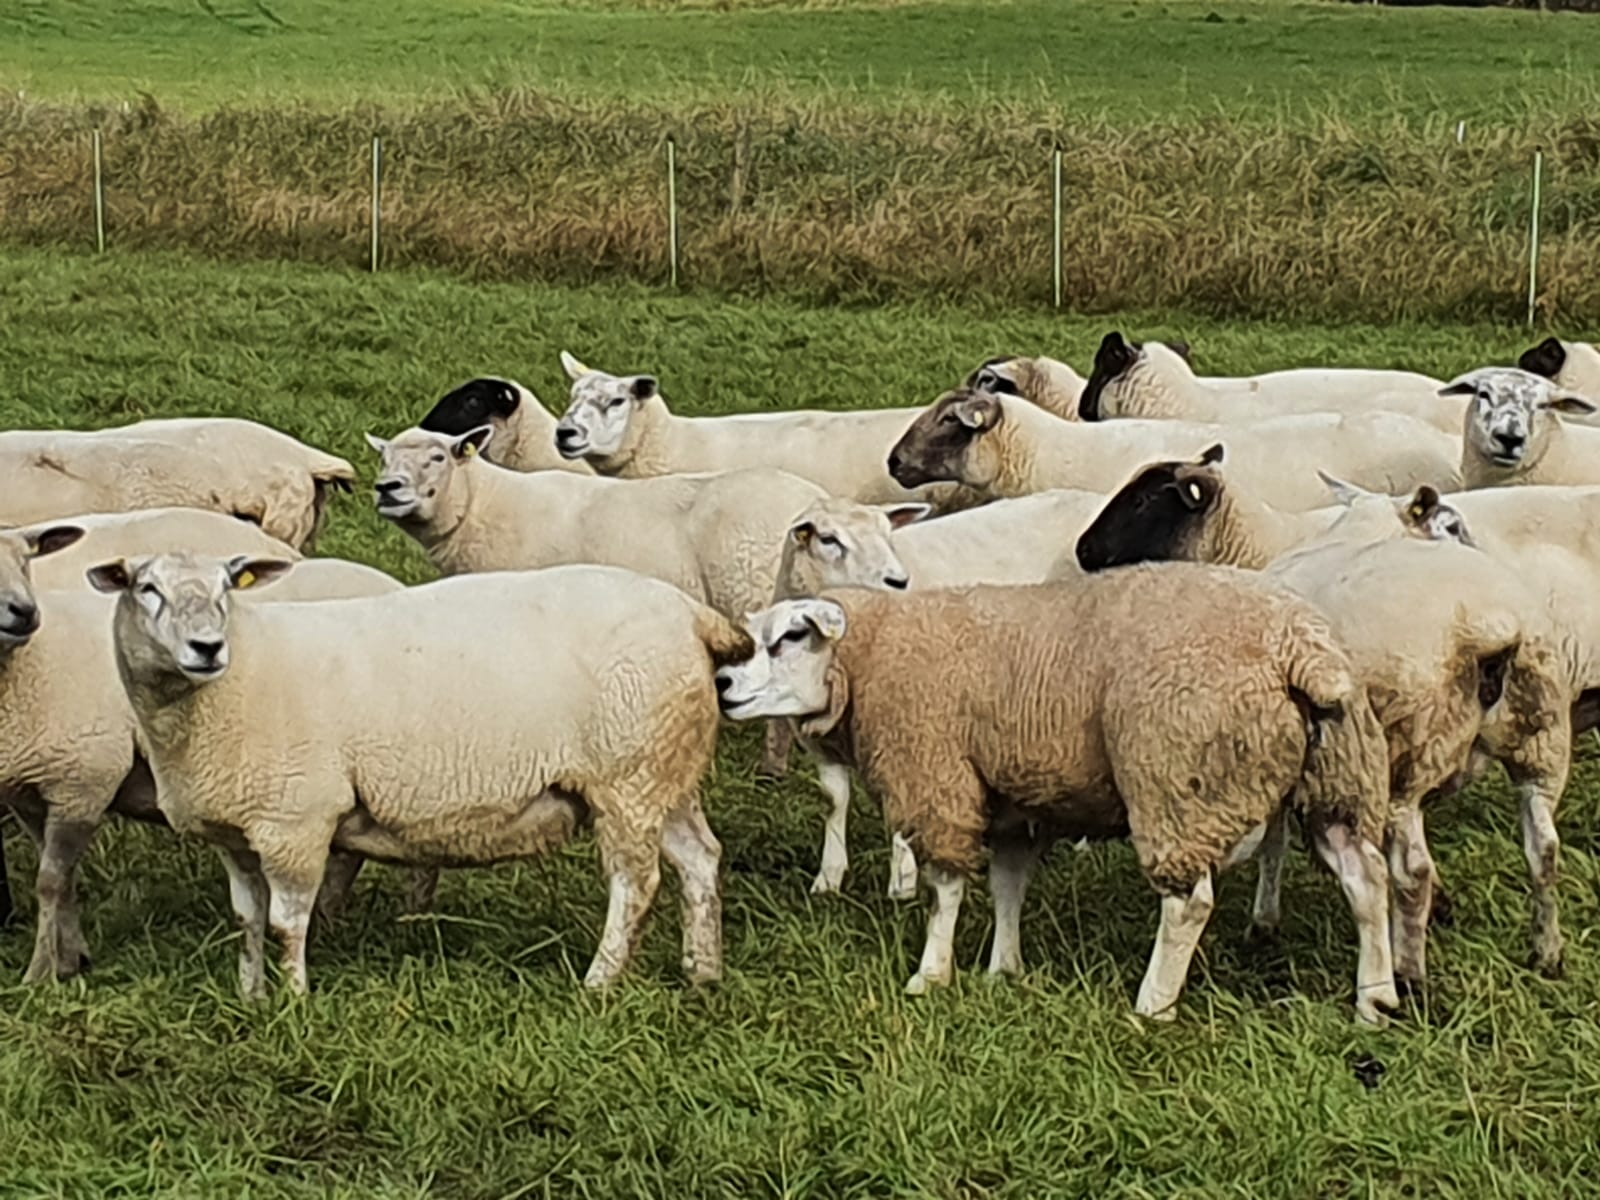 How to record Mating using Sheep Ireland’s App? Now it’s the best time to do it.